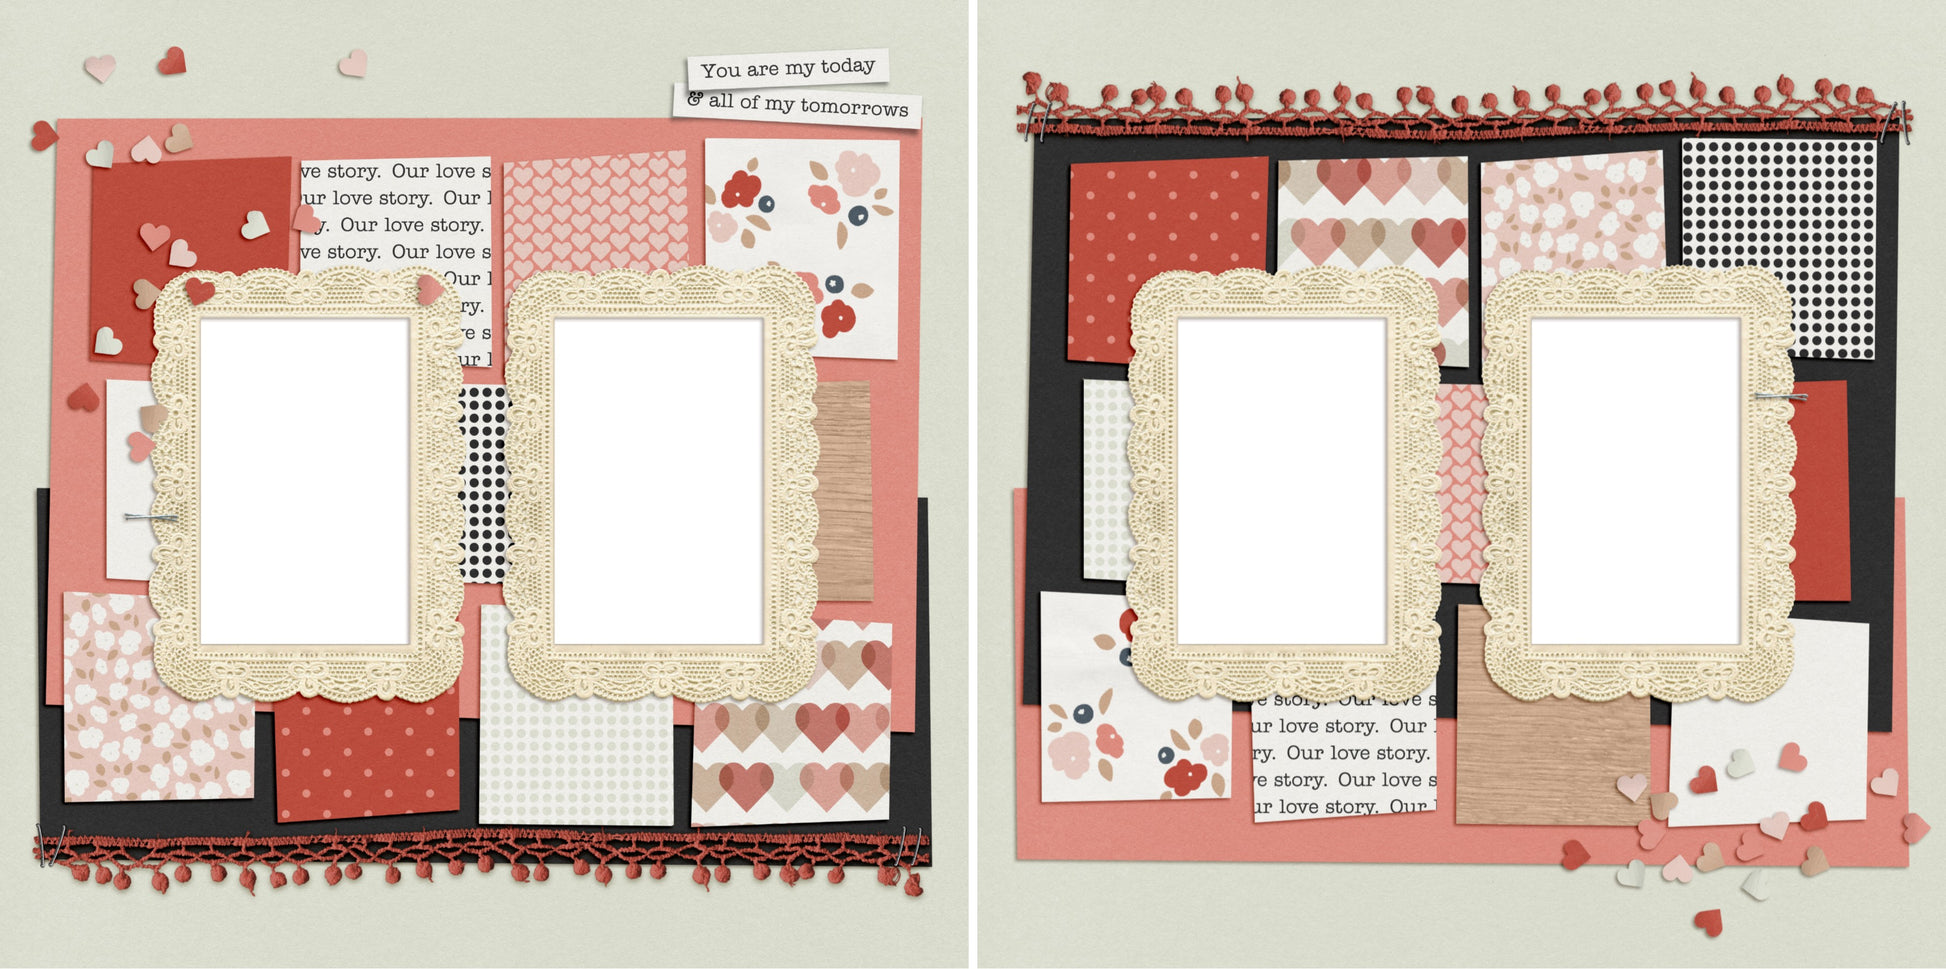 Today And Tomorrows - Digital Scrapbook Pages - INSTANT DOWNLOAD - EZscrapbooks Scrapbook Layouts Love - Valentine, Other